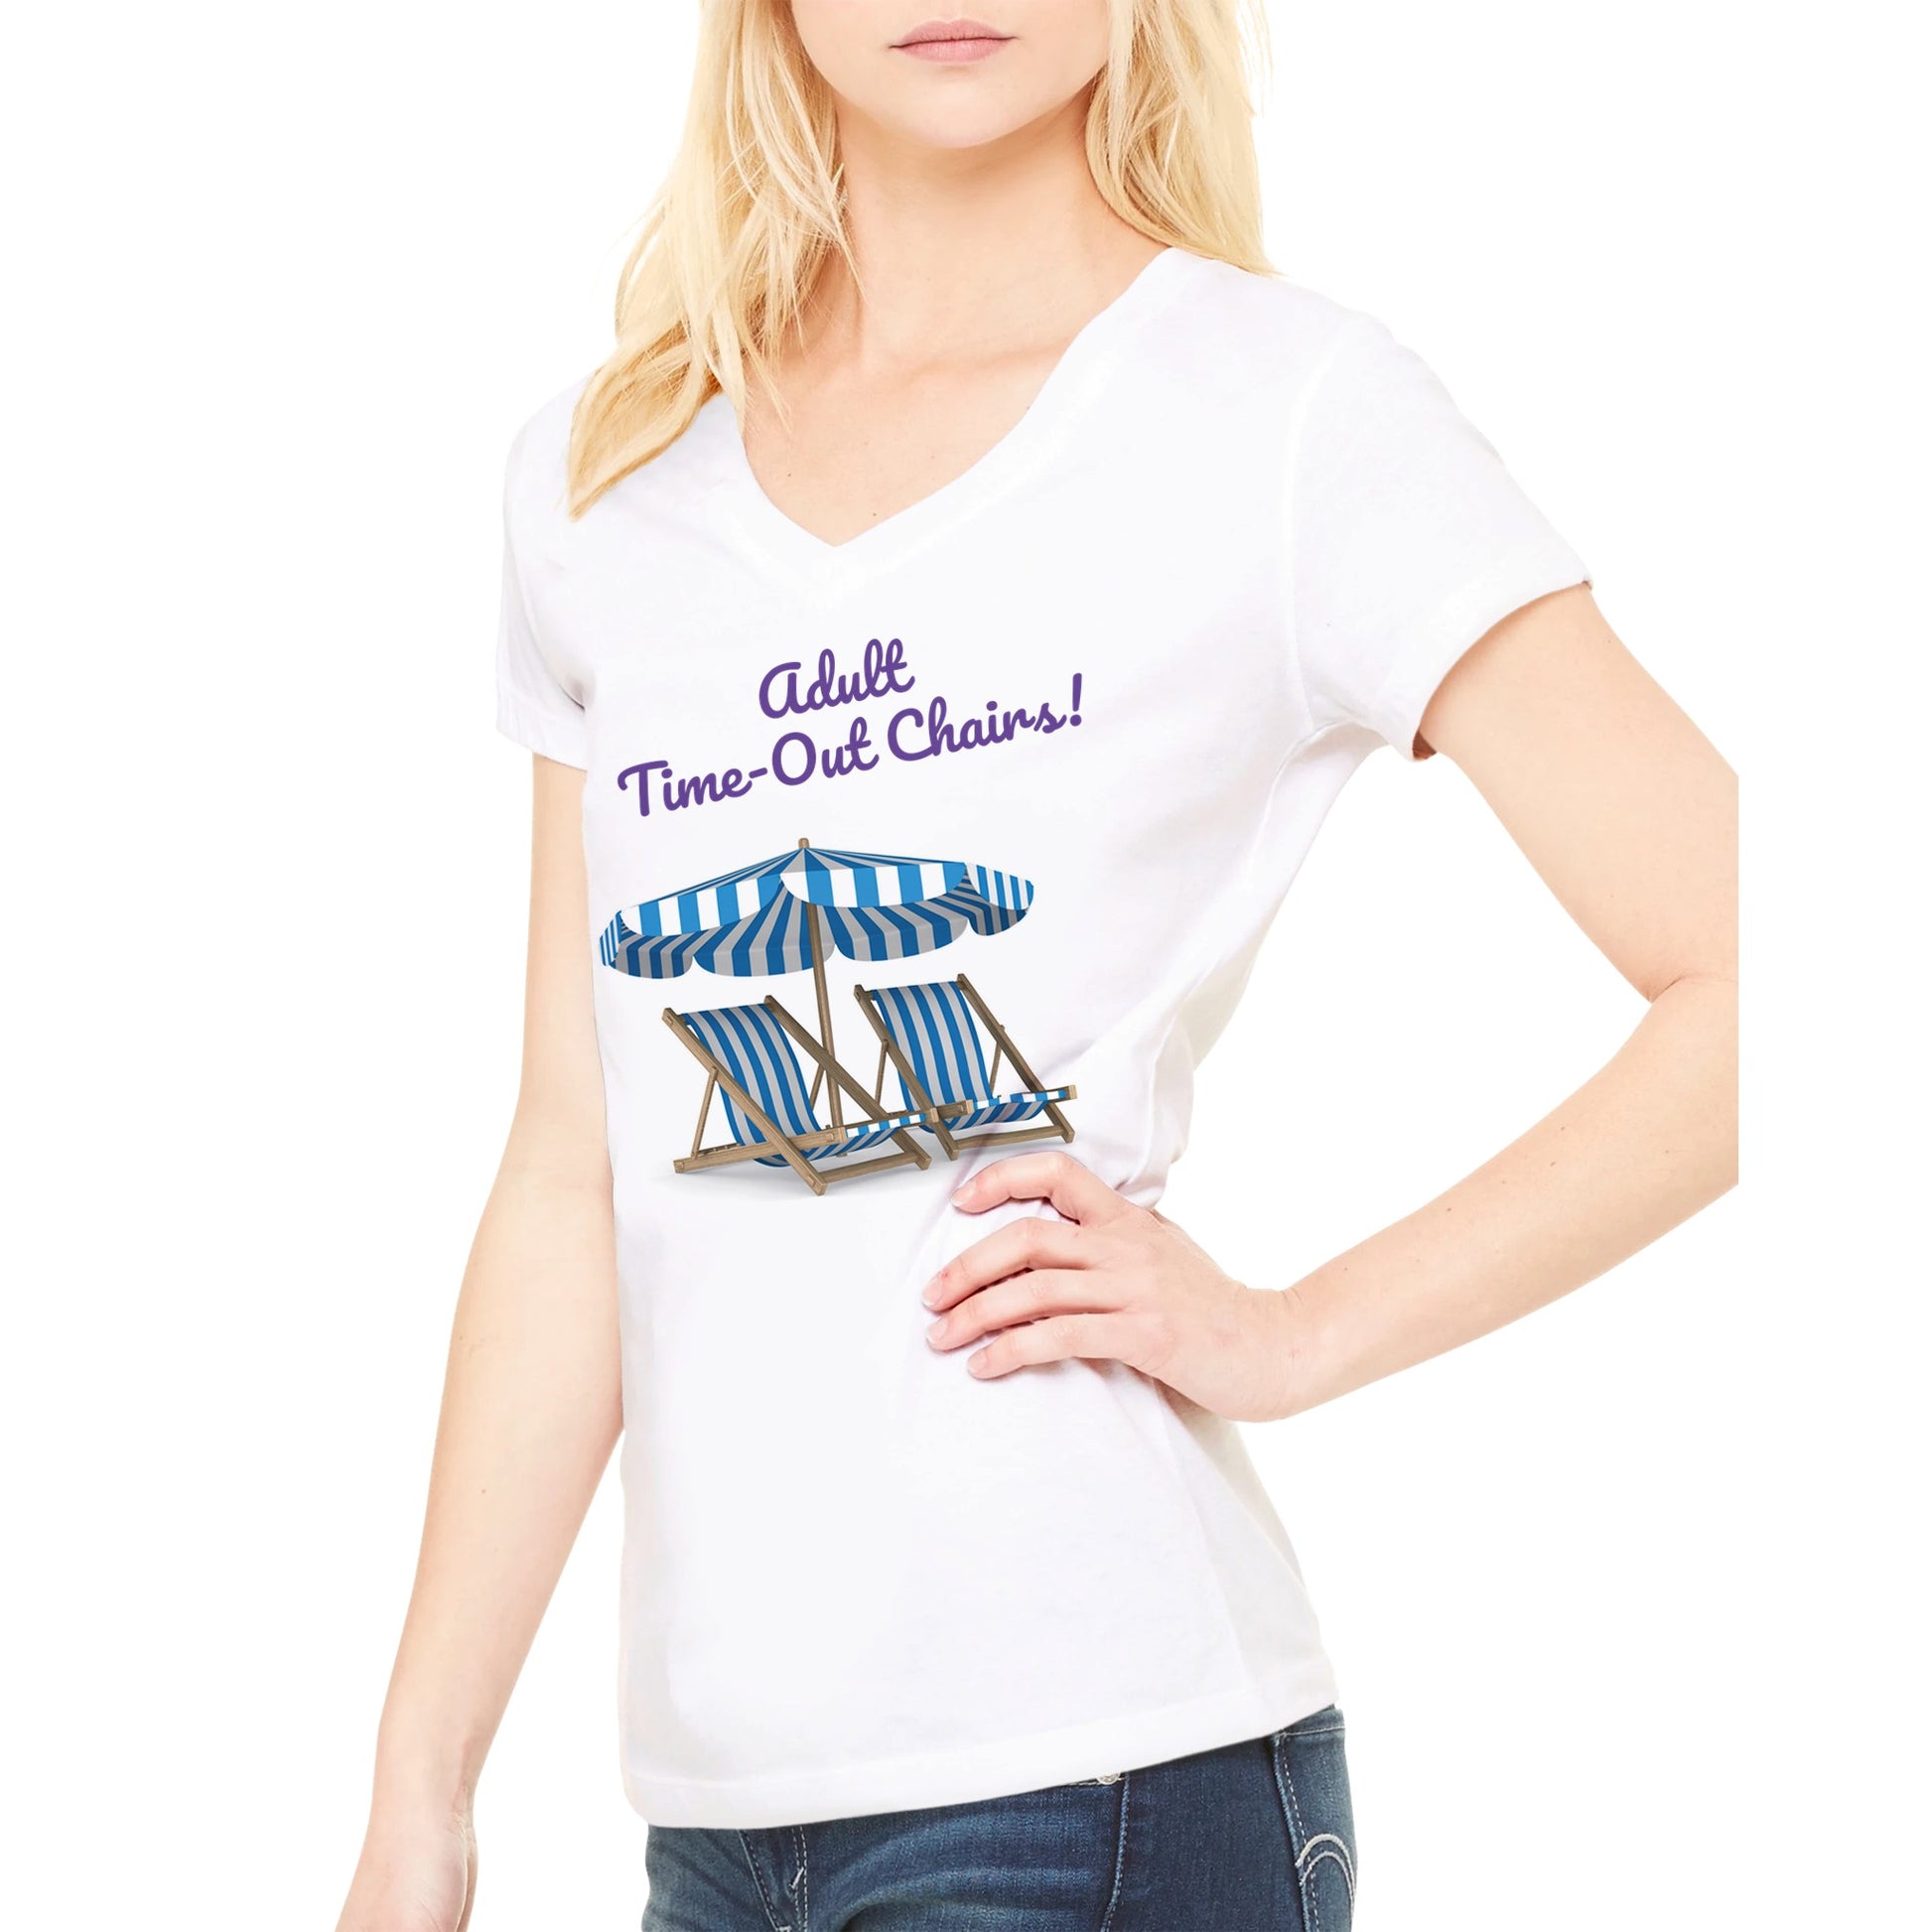 A premium women’s V-neck t-shirt with original Adult Time-Out Chairs! on front from WhatYa Say Apparel made from combed and ring-spun cotton worn by blonde hair Female model.